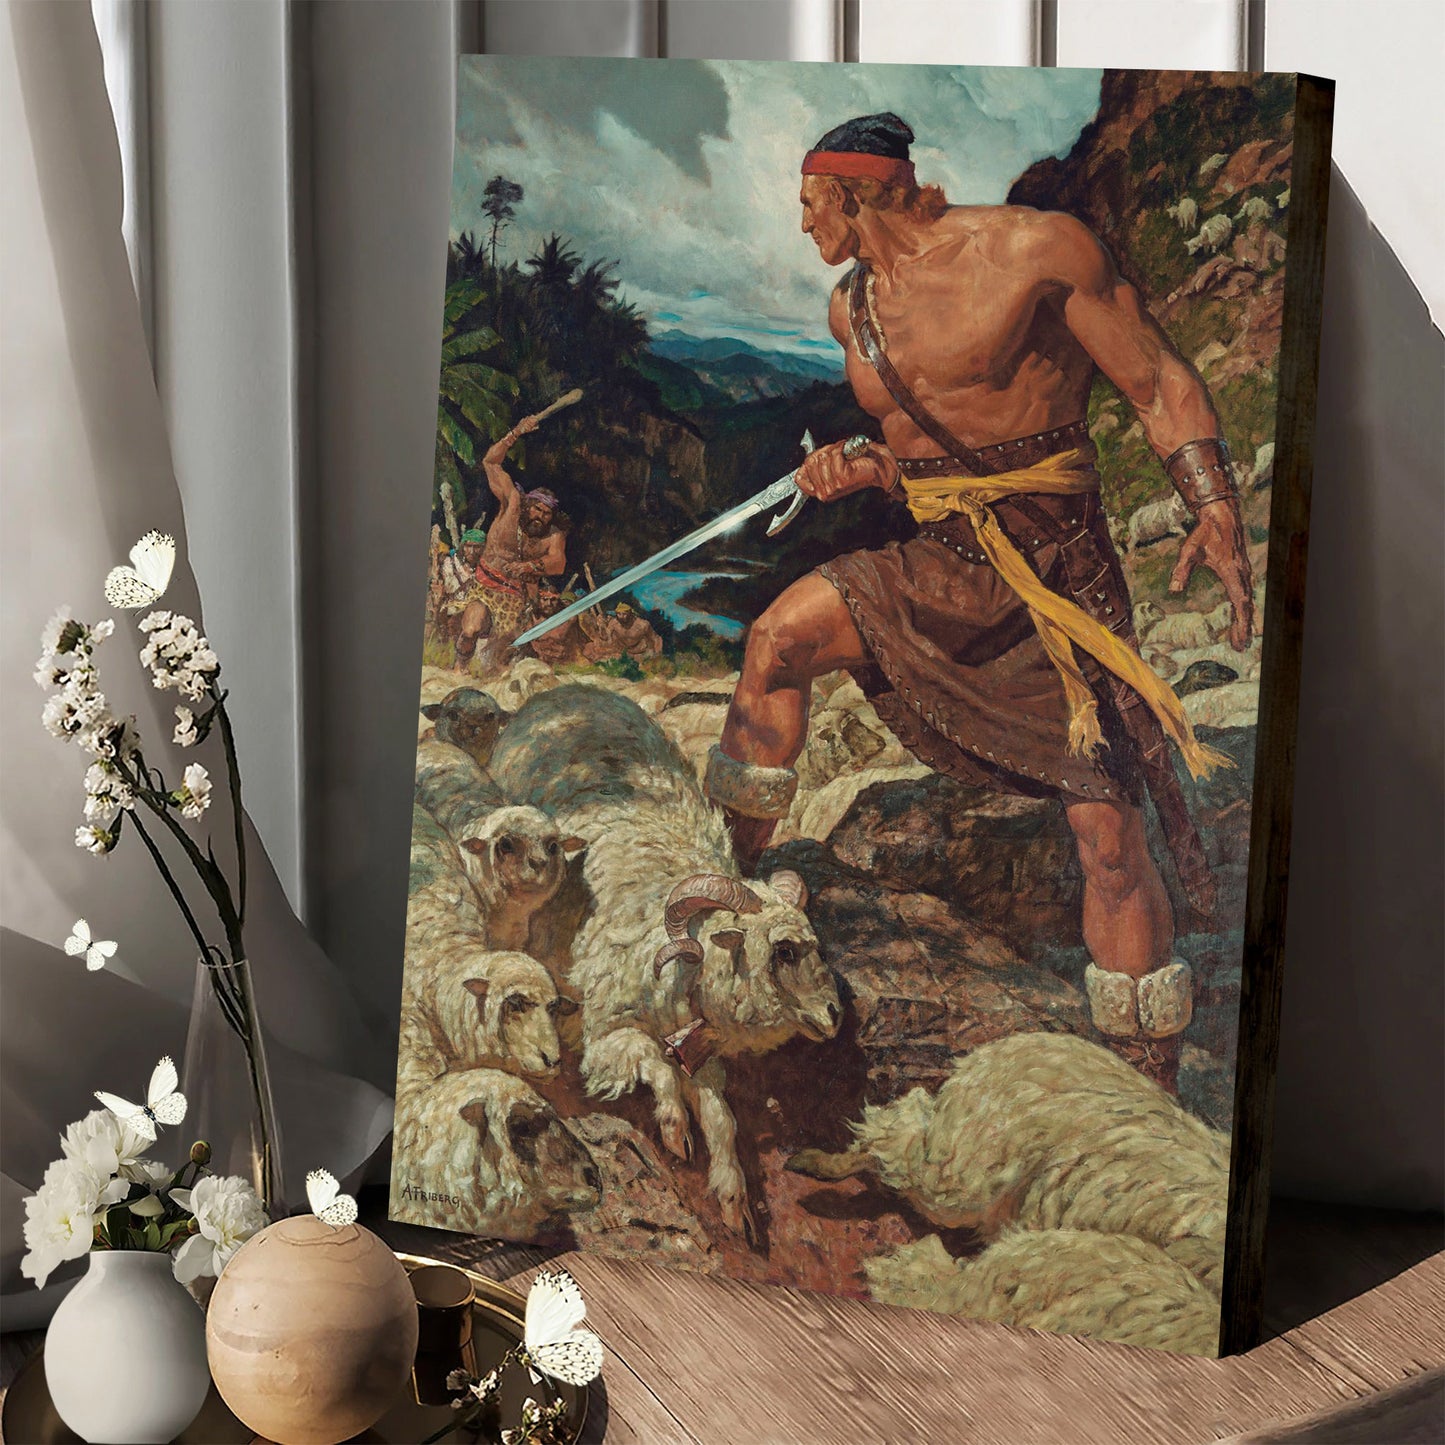 Ammon Defends The Flocks Of King Lamoni Canvas Pictures - Religious Canvas Wall Art - Scriptures Wall Decor